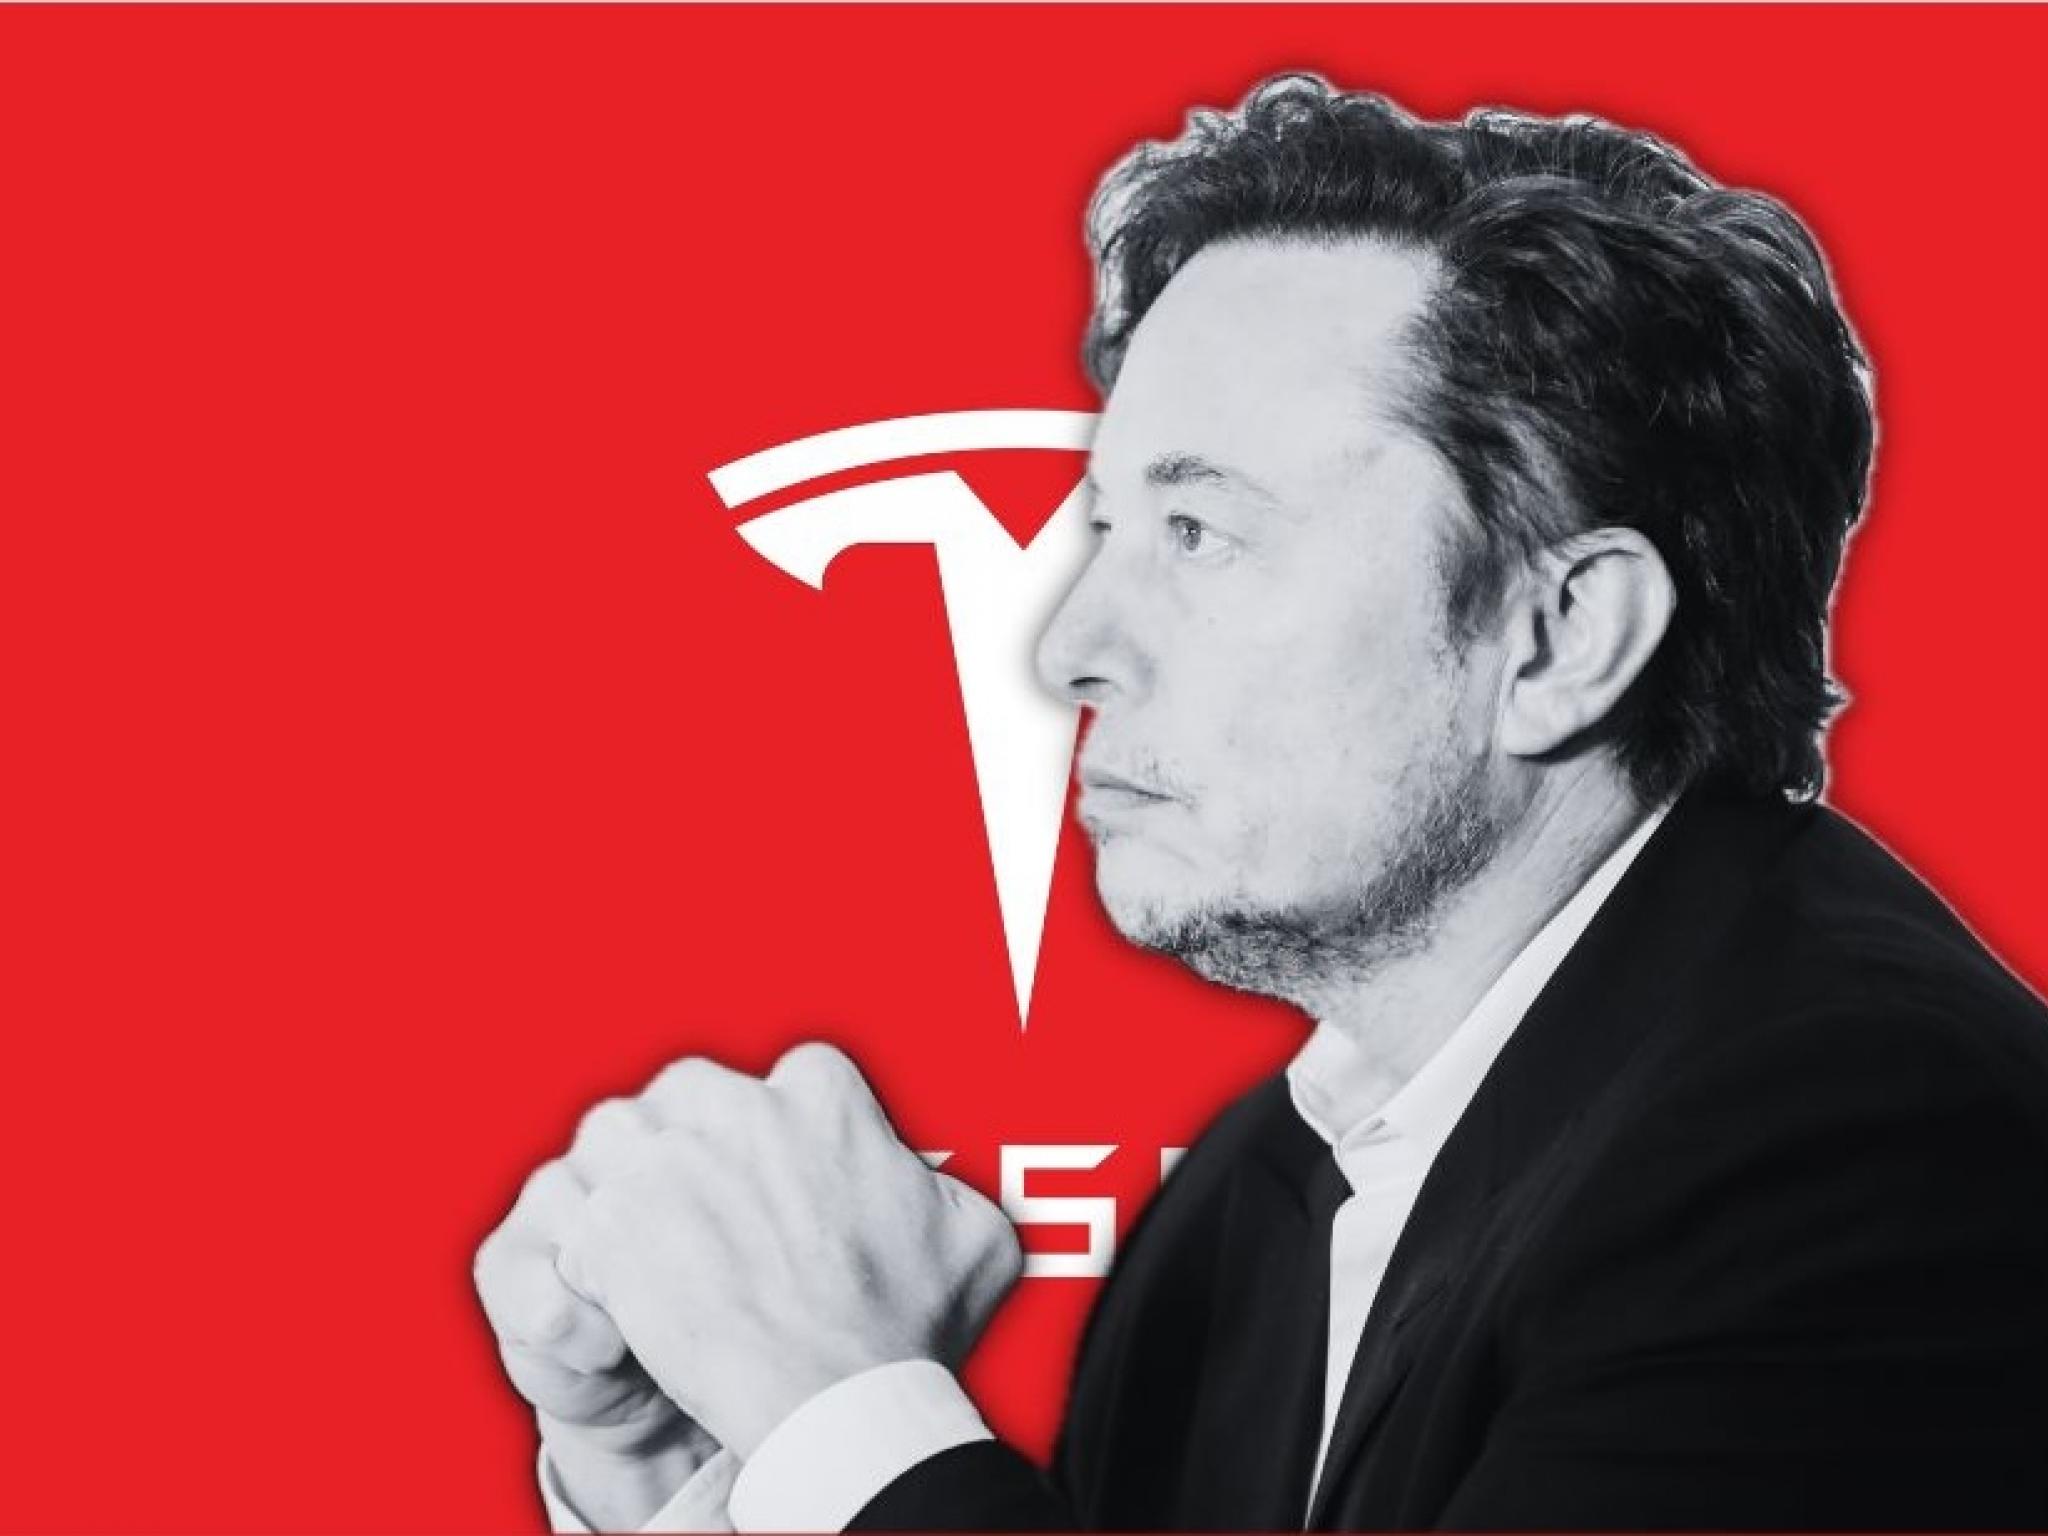  elon-musk-cracks-whip-harder-2-more-senior-tesla-execs-reportedly-exit-as-ceo-demands-absolutely-hardcore-workforce-cost-cuts 